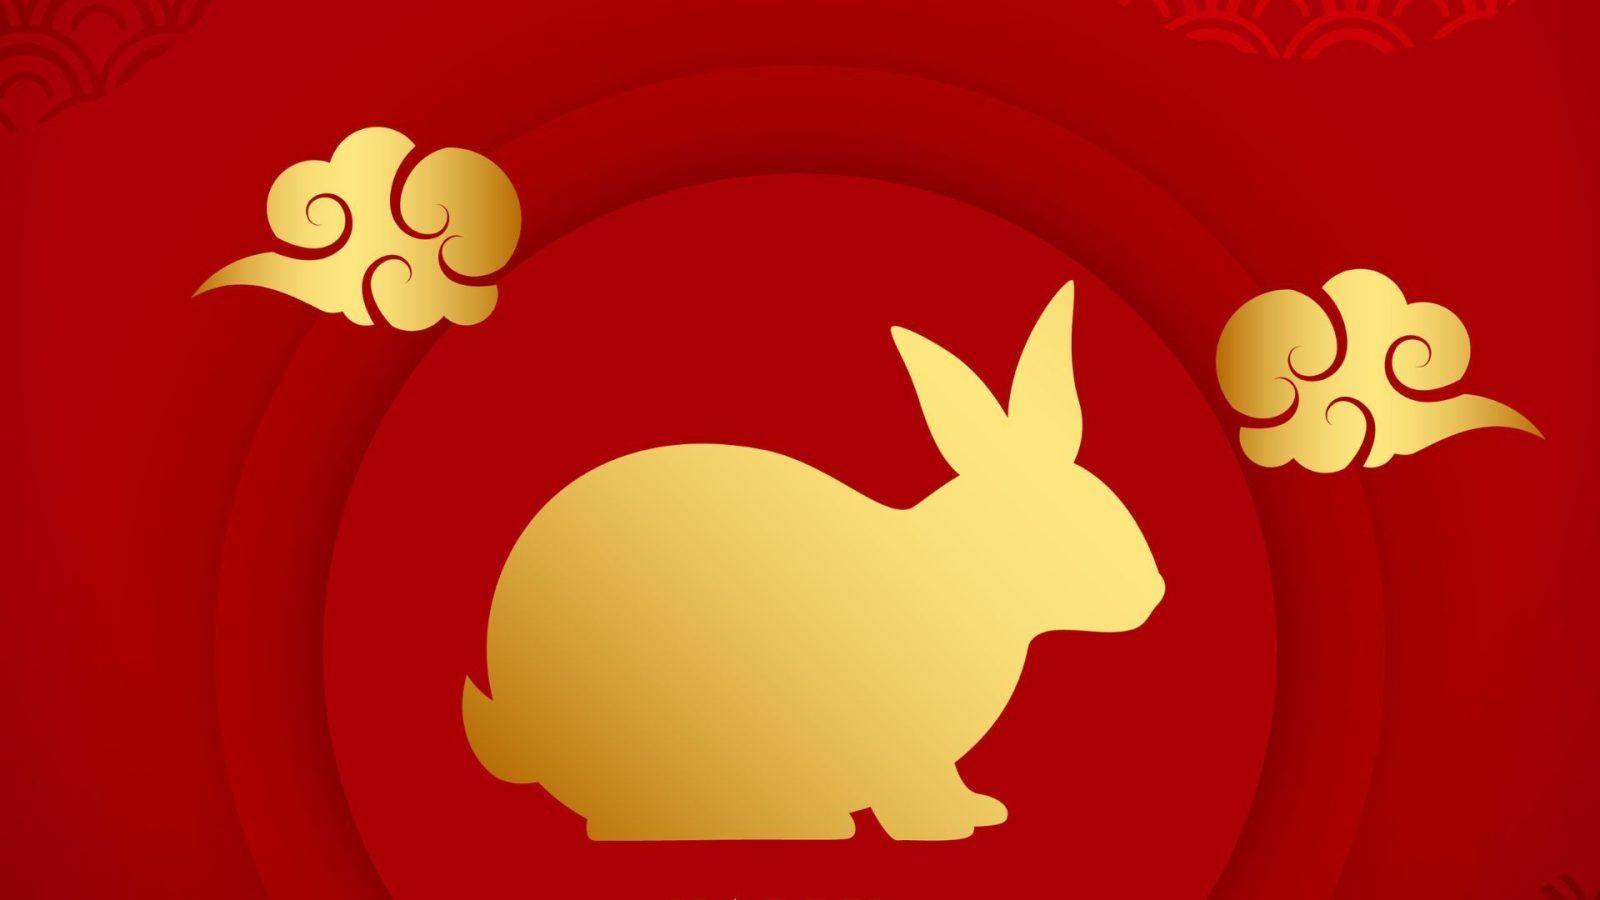 The Year of the Rabbit: what the Chinese zodiac tells us about